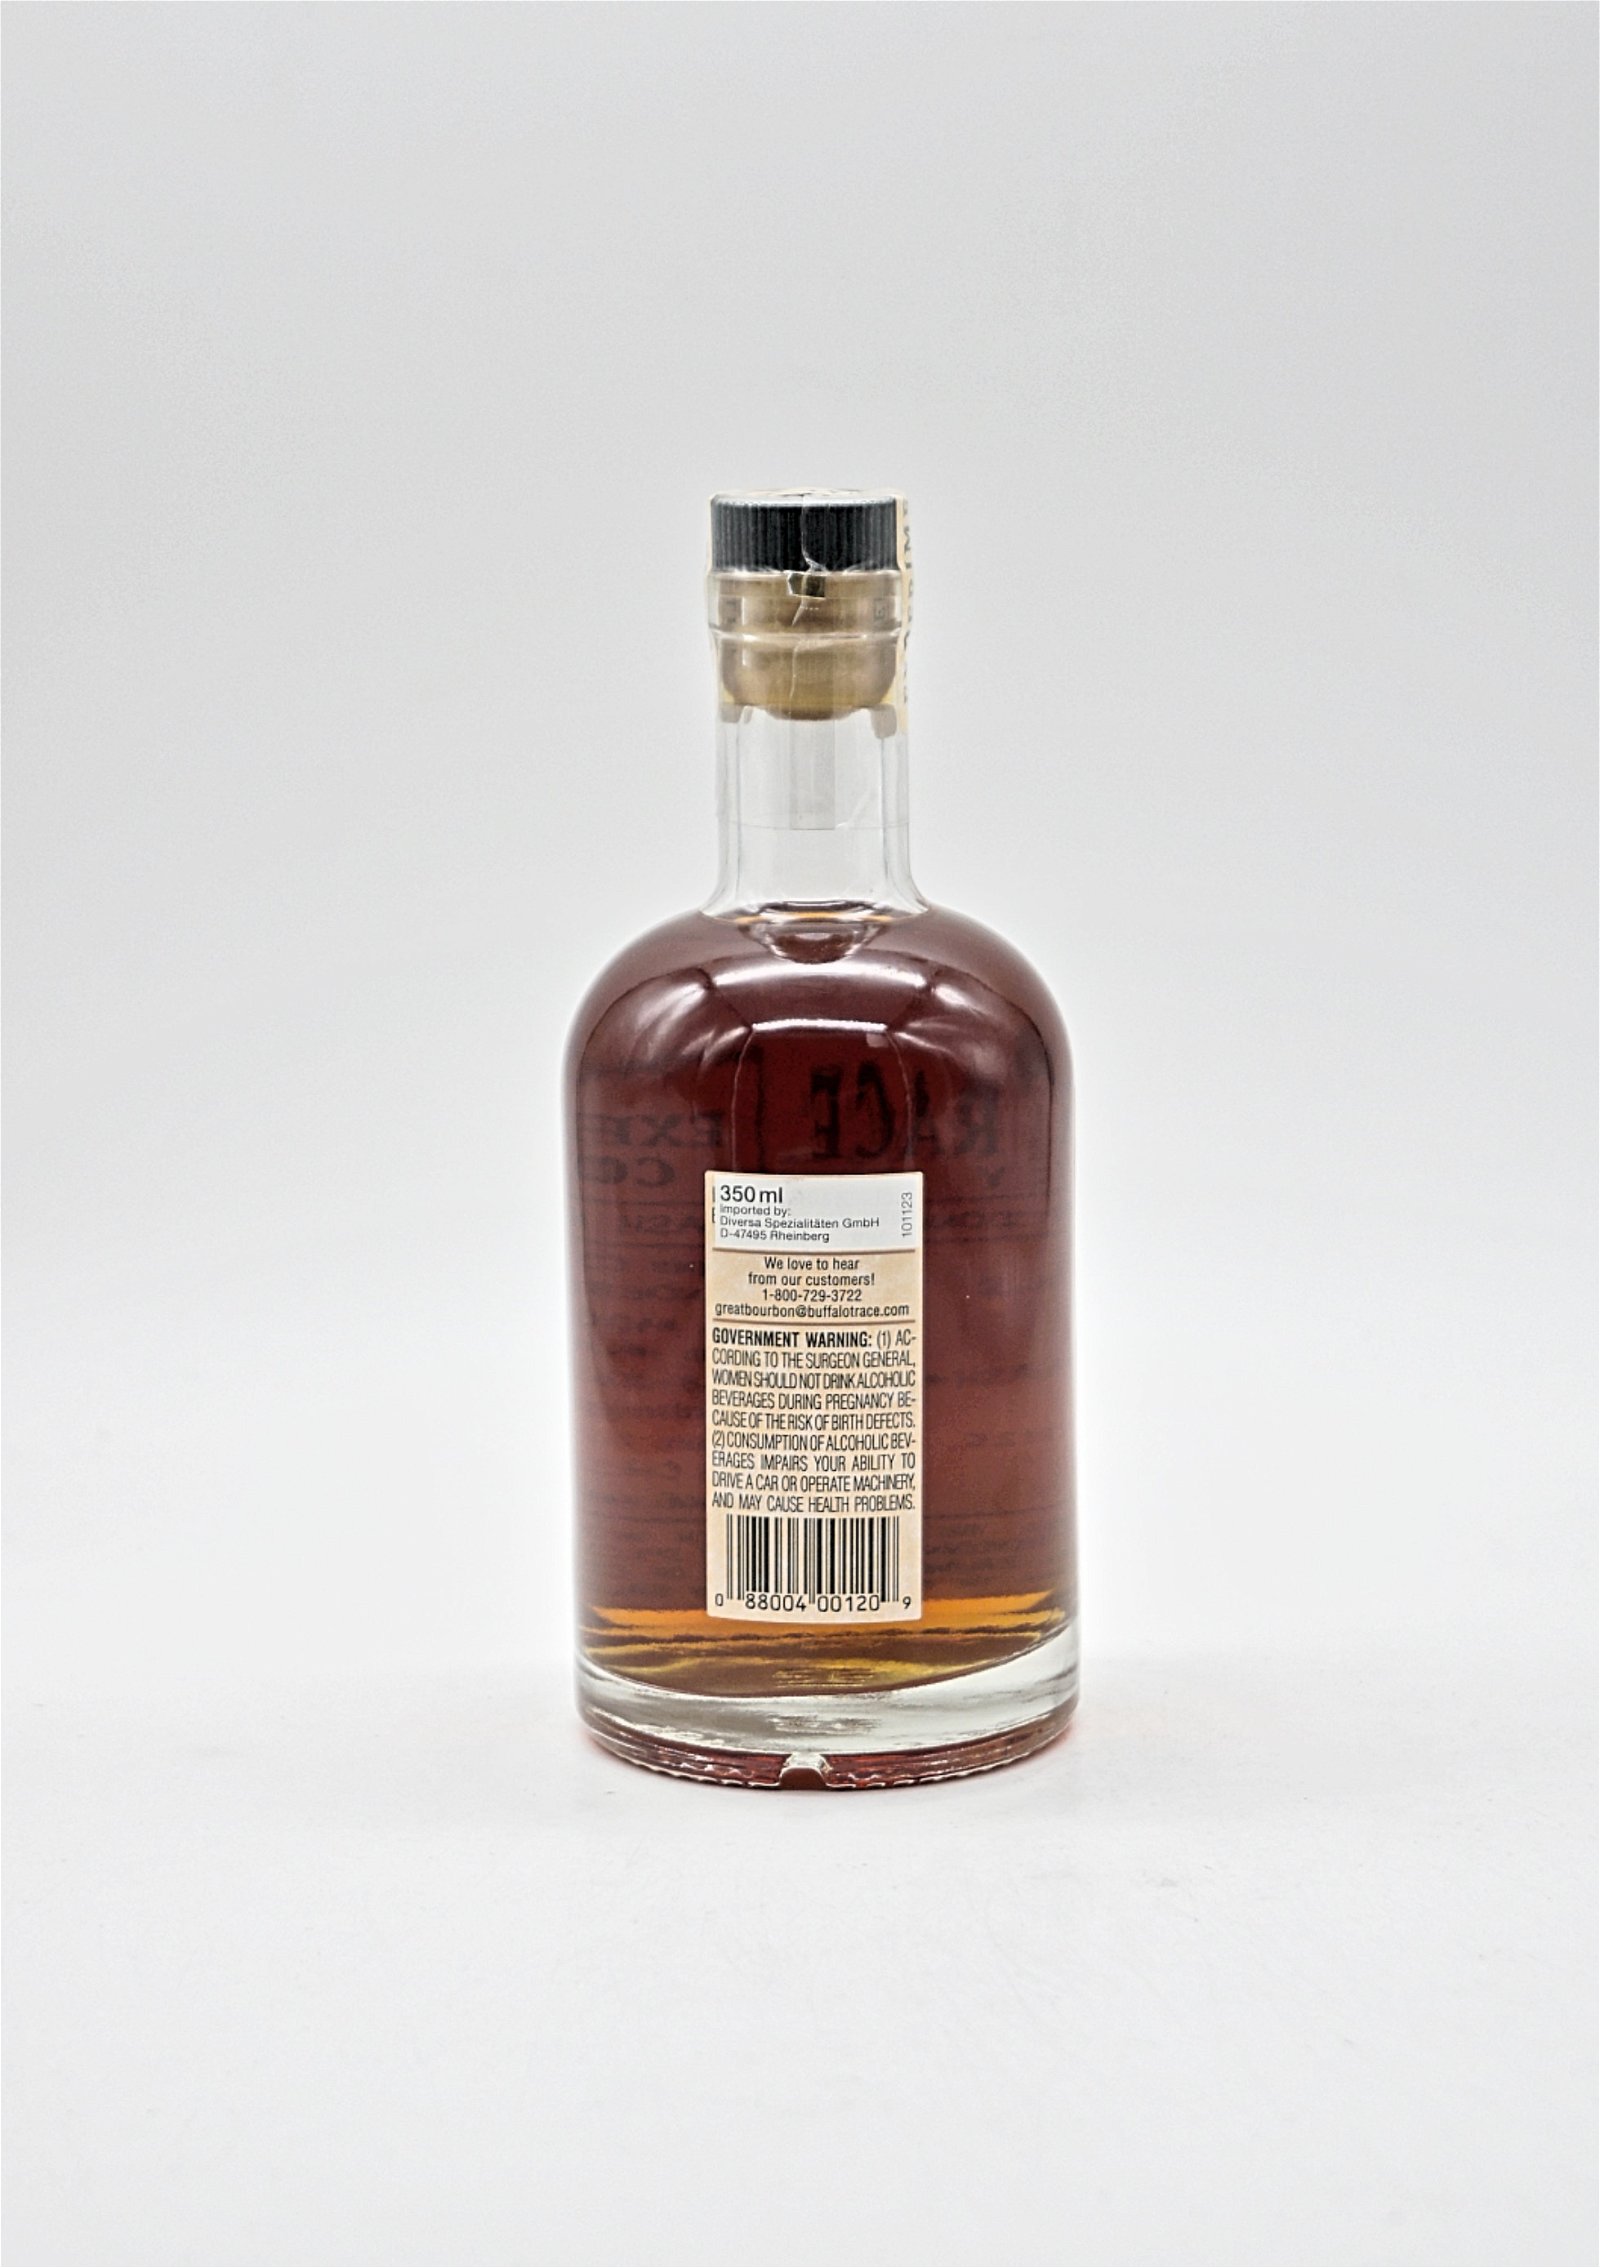 Buffalo Trace Distillery Experimental Collection 2002/2015 Entry Proof 125 Bourbon Whiskey